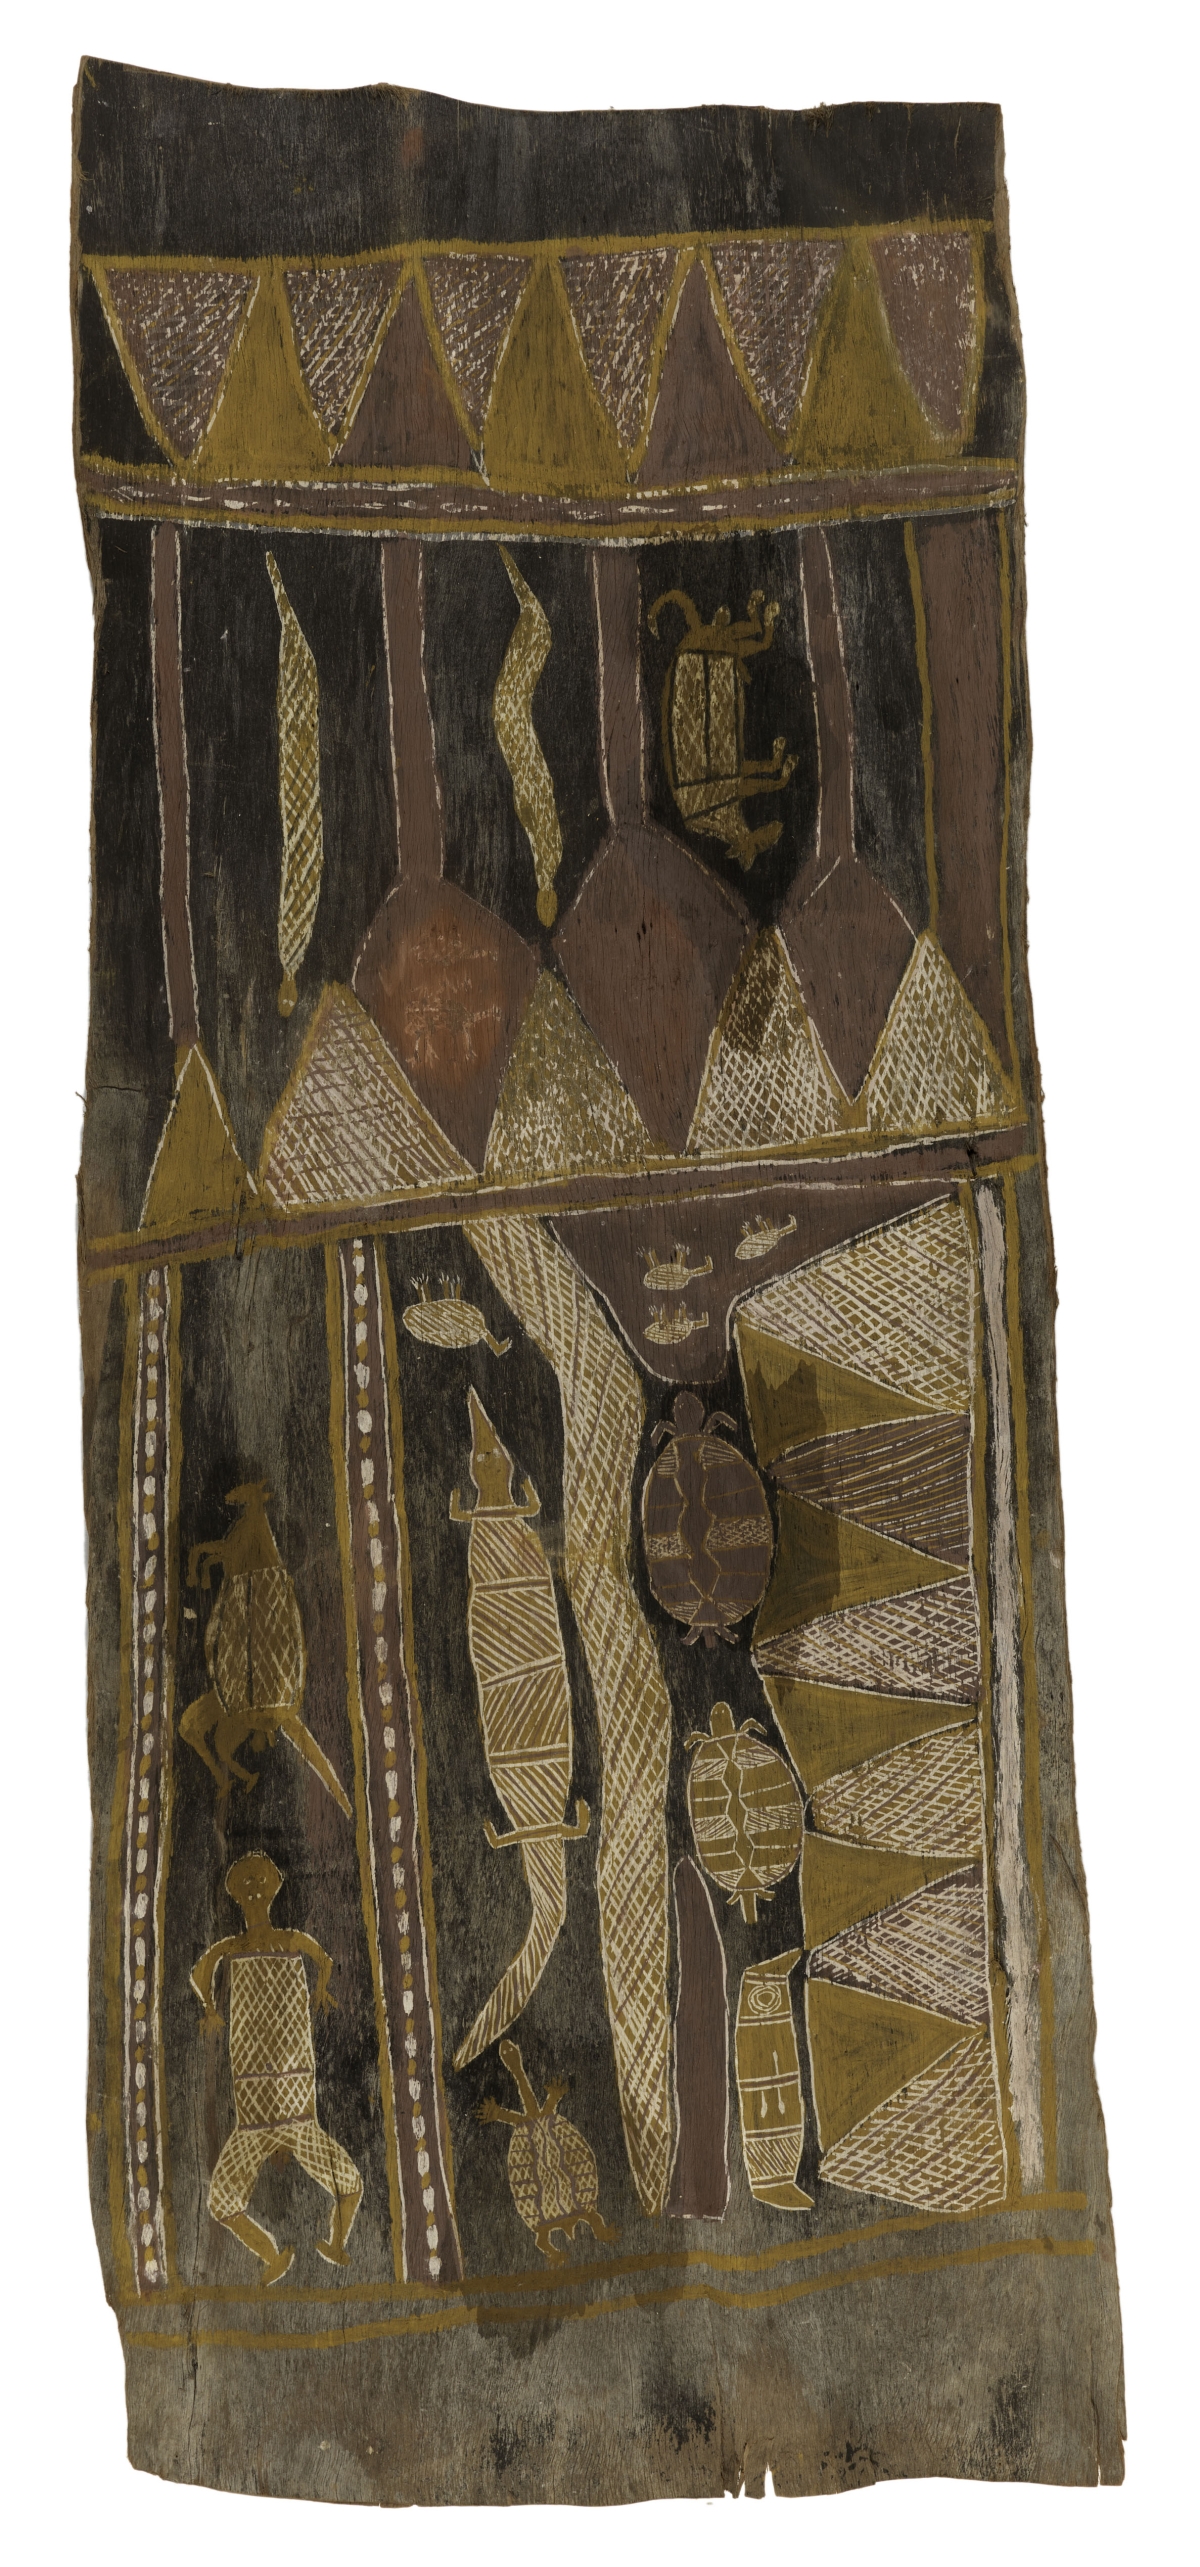 Vertical painting with various shades of brown and ocher; triangular shapes form bands at top, middle and aloong the right side. Anmials, such as snakes, turtles and other reptiles are inside columns inside rectangles.